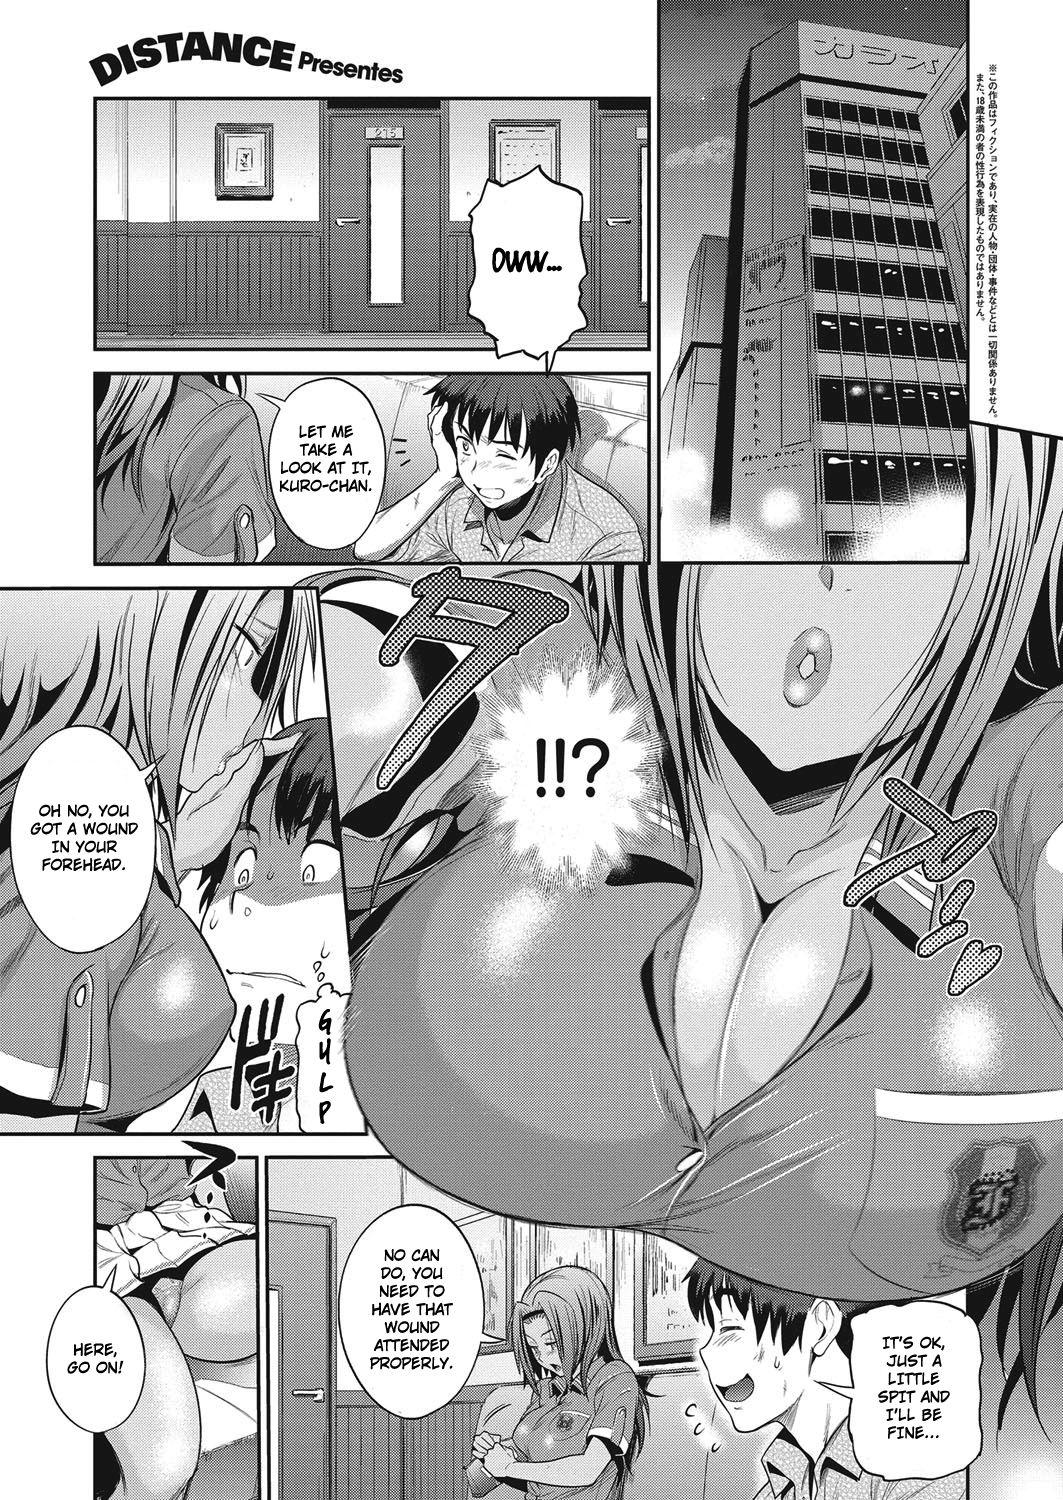 Ass Worship [DISTANCE] Joshi Lacu! - Girls Lacrosse Club ~2 Years Later~ Ch. 3 (COMIC ExE 04) [English] [TripleSevenScans] [Digital] Girls Getting Fucked - Page 1